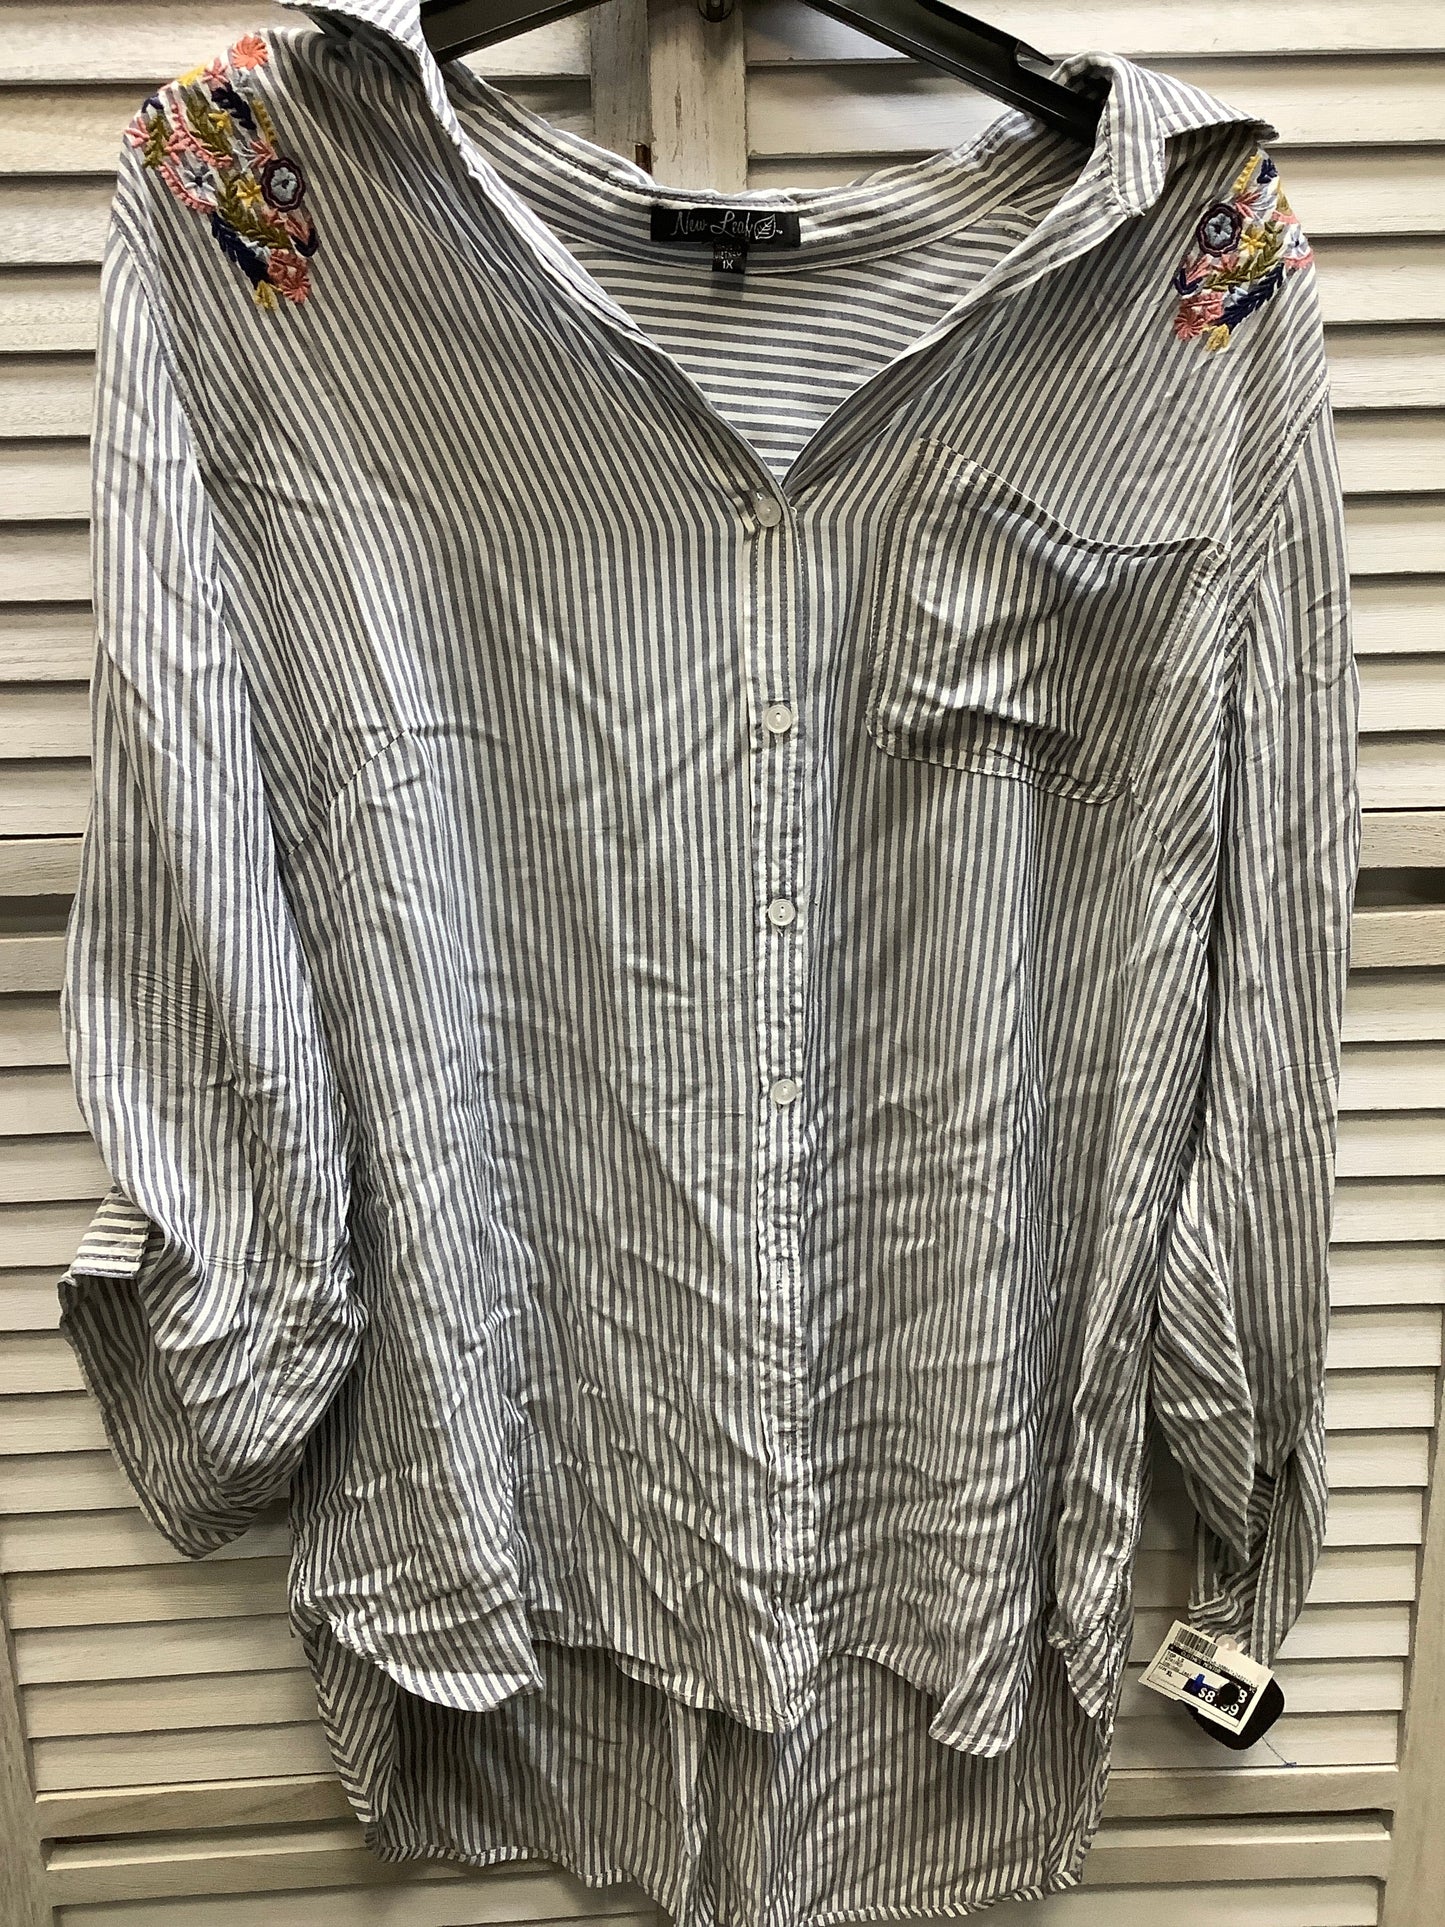 Striped Top Long Sleeve Clothes Mentor, Size Xl